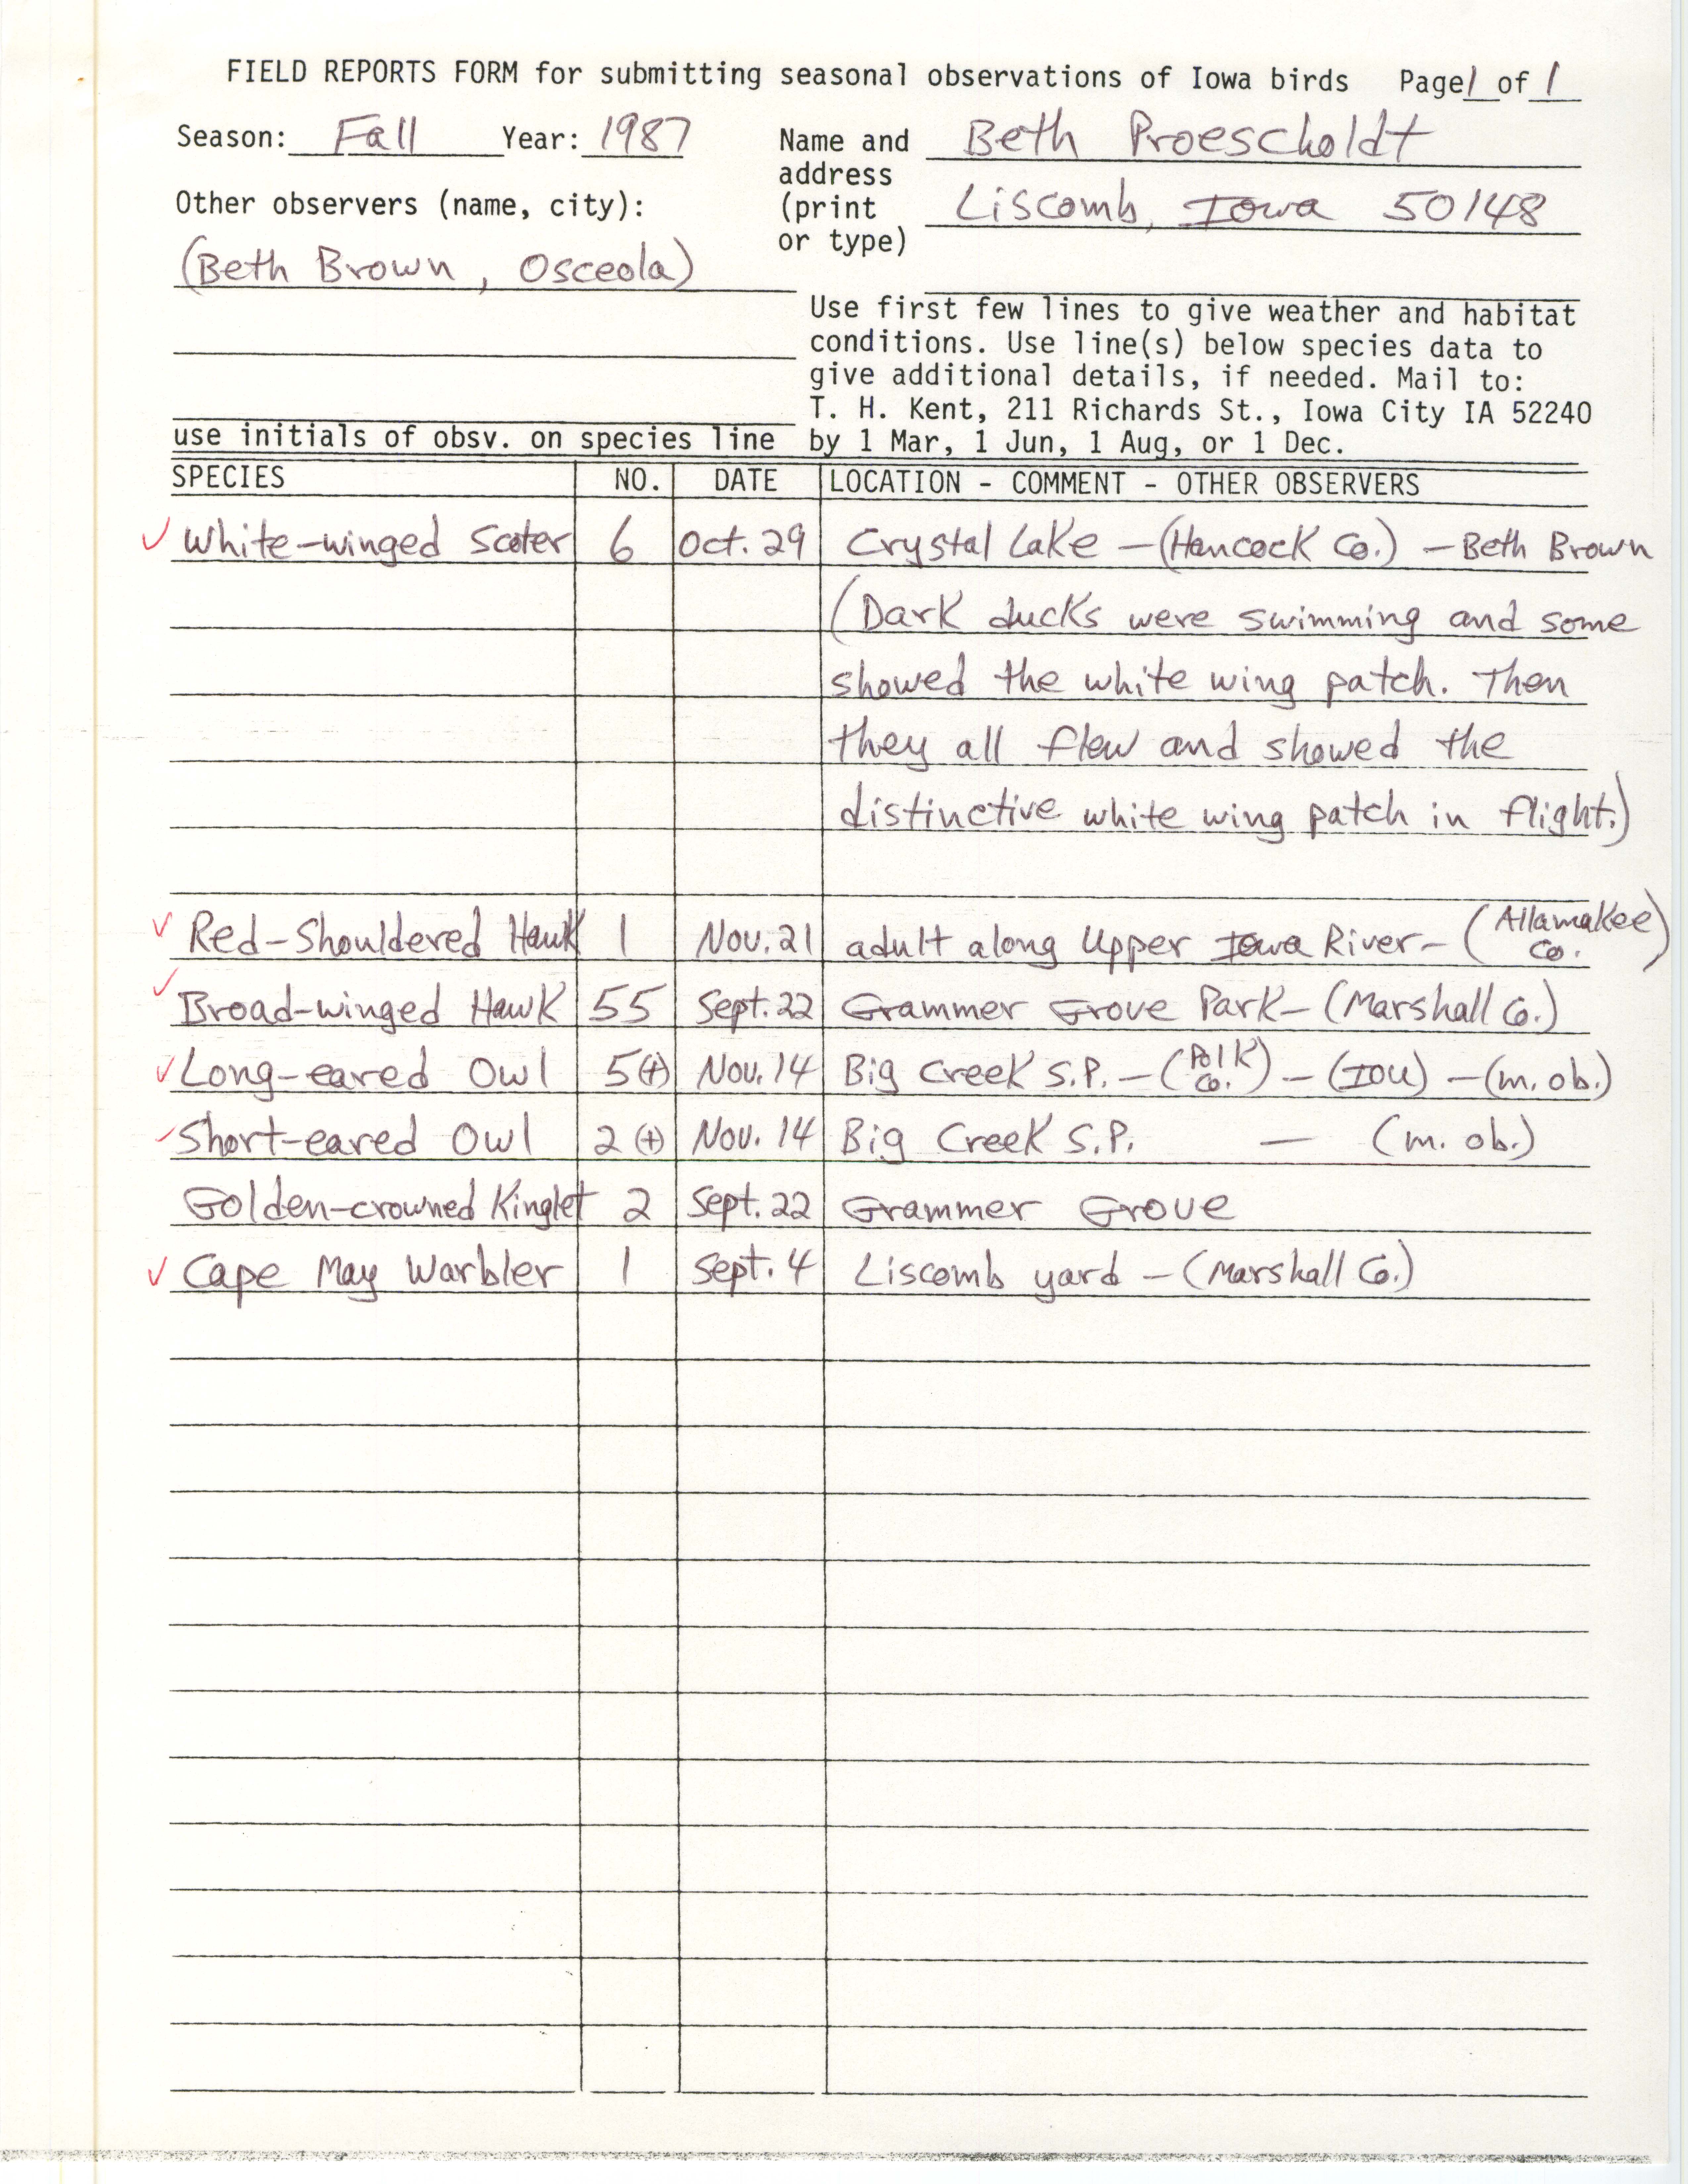 Field reports form for submitting seasonal observations of Iowa birds, Beth Proescholdt, fall 1987